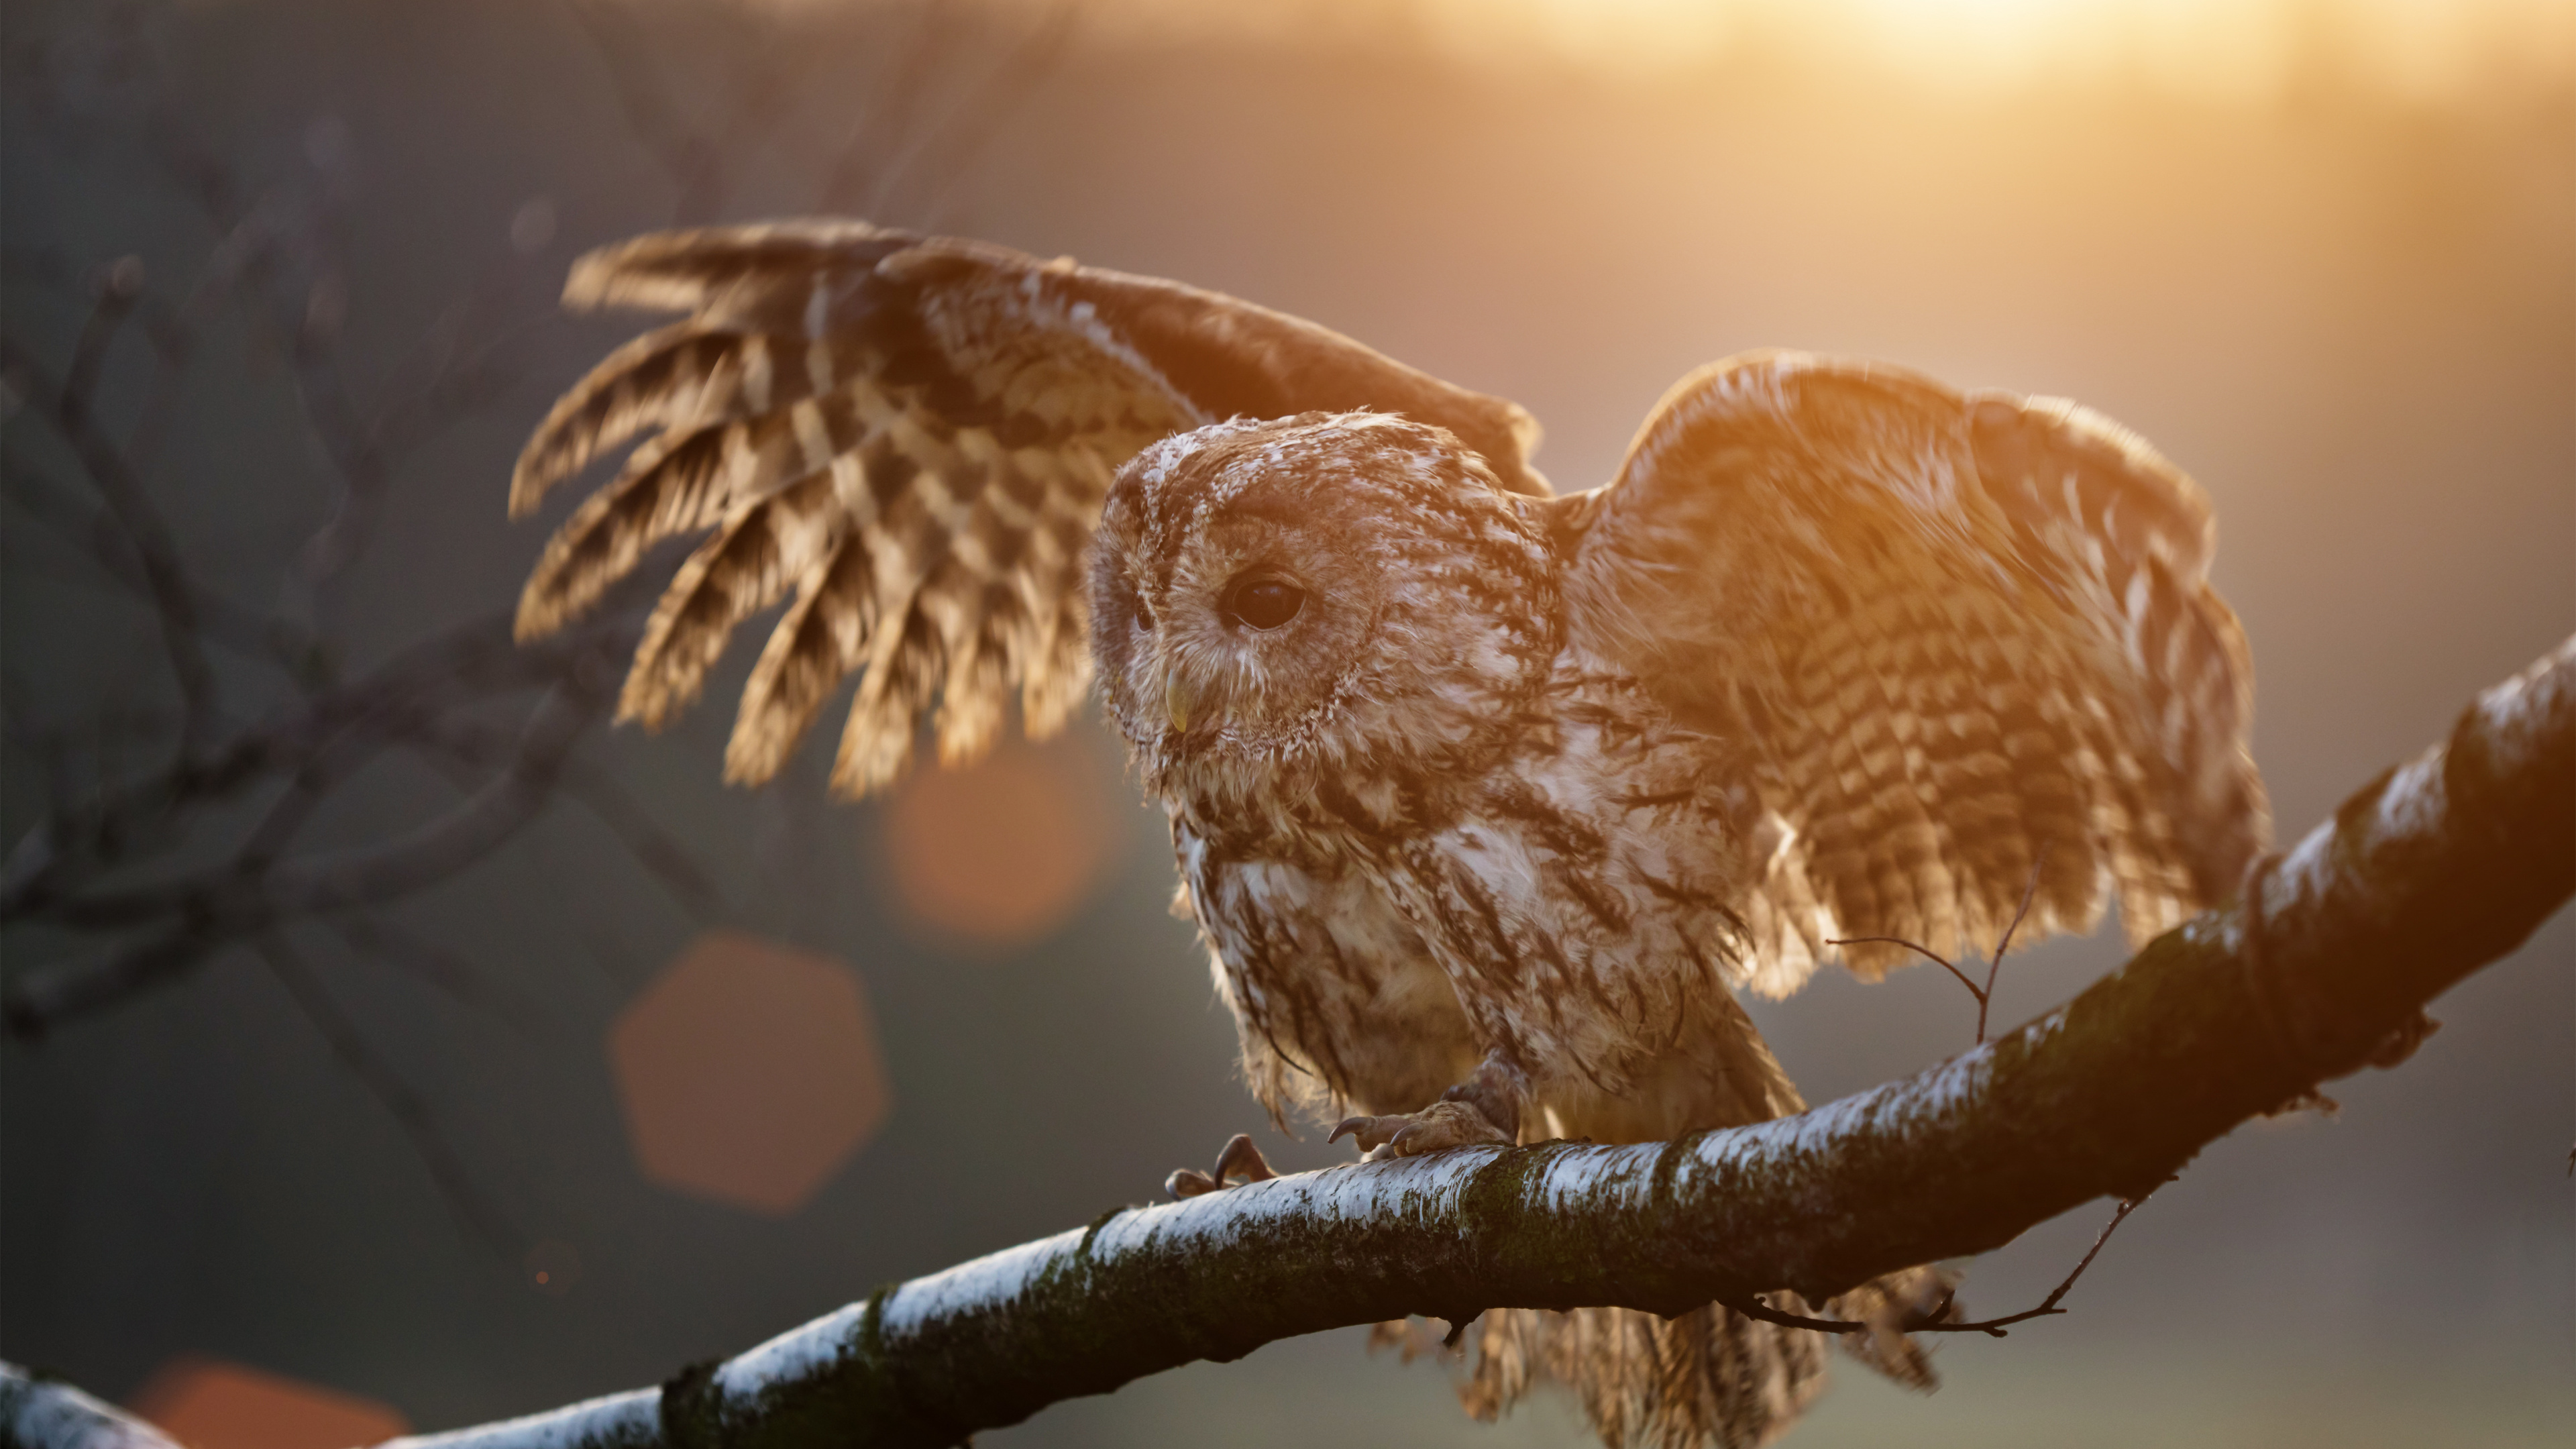 Brown Owl Perched on Brown Tree Branch During Daytime. Wallpaper in 3840x2160 Resolution